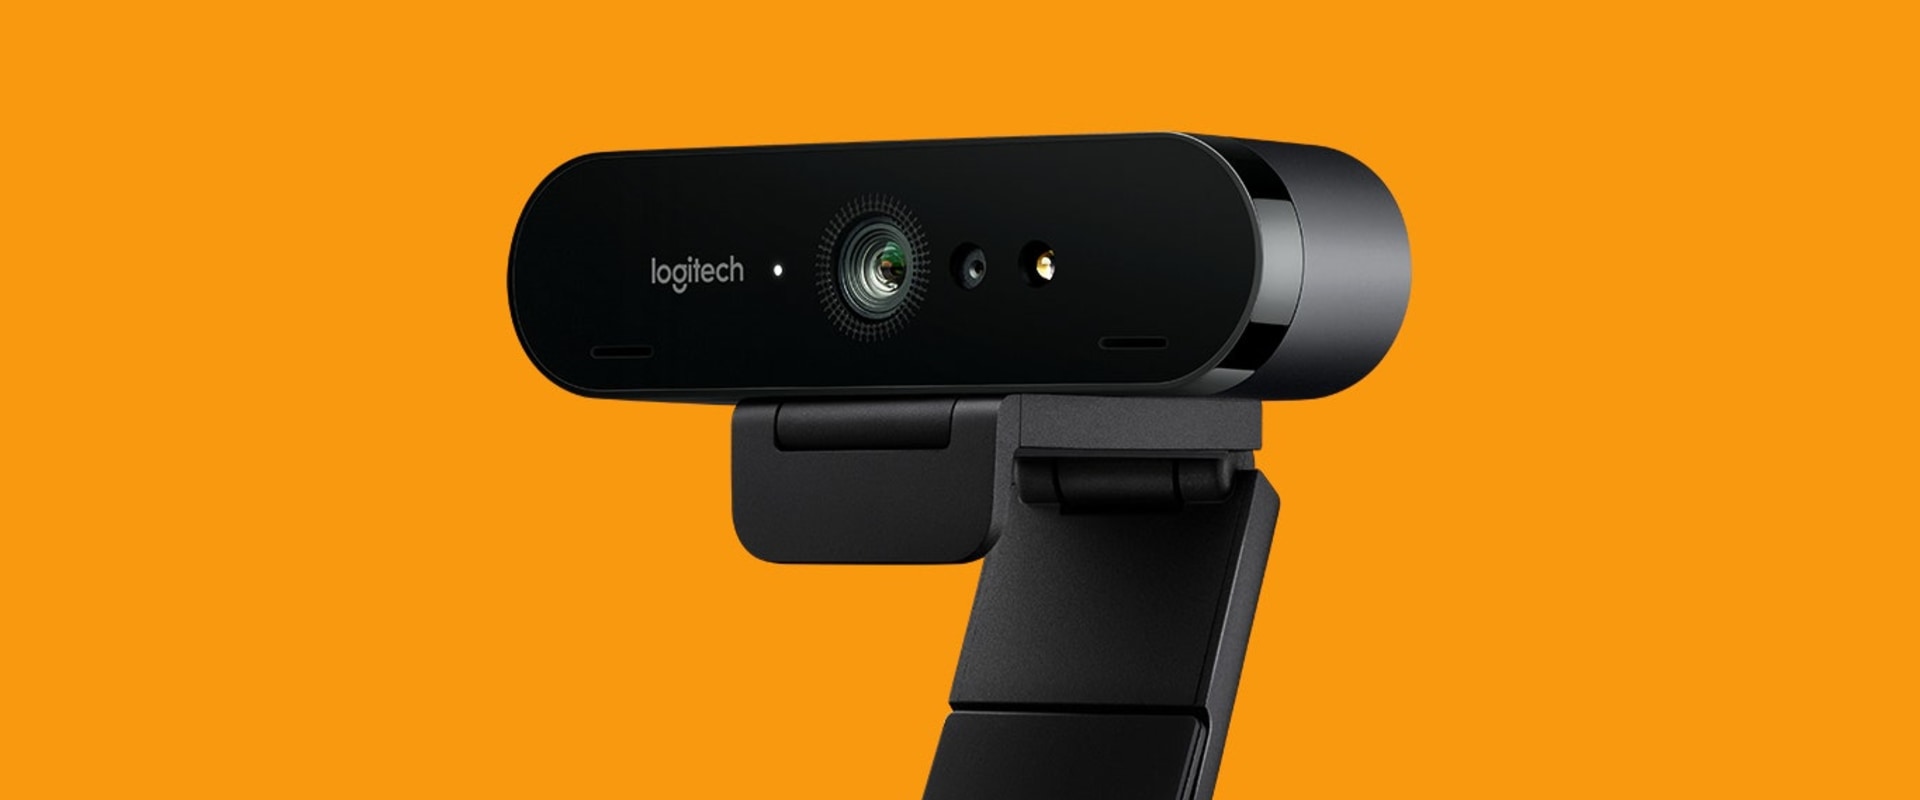 Portable Webcams: Types, Benefits, and Uses